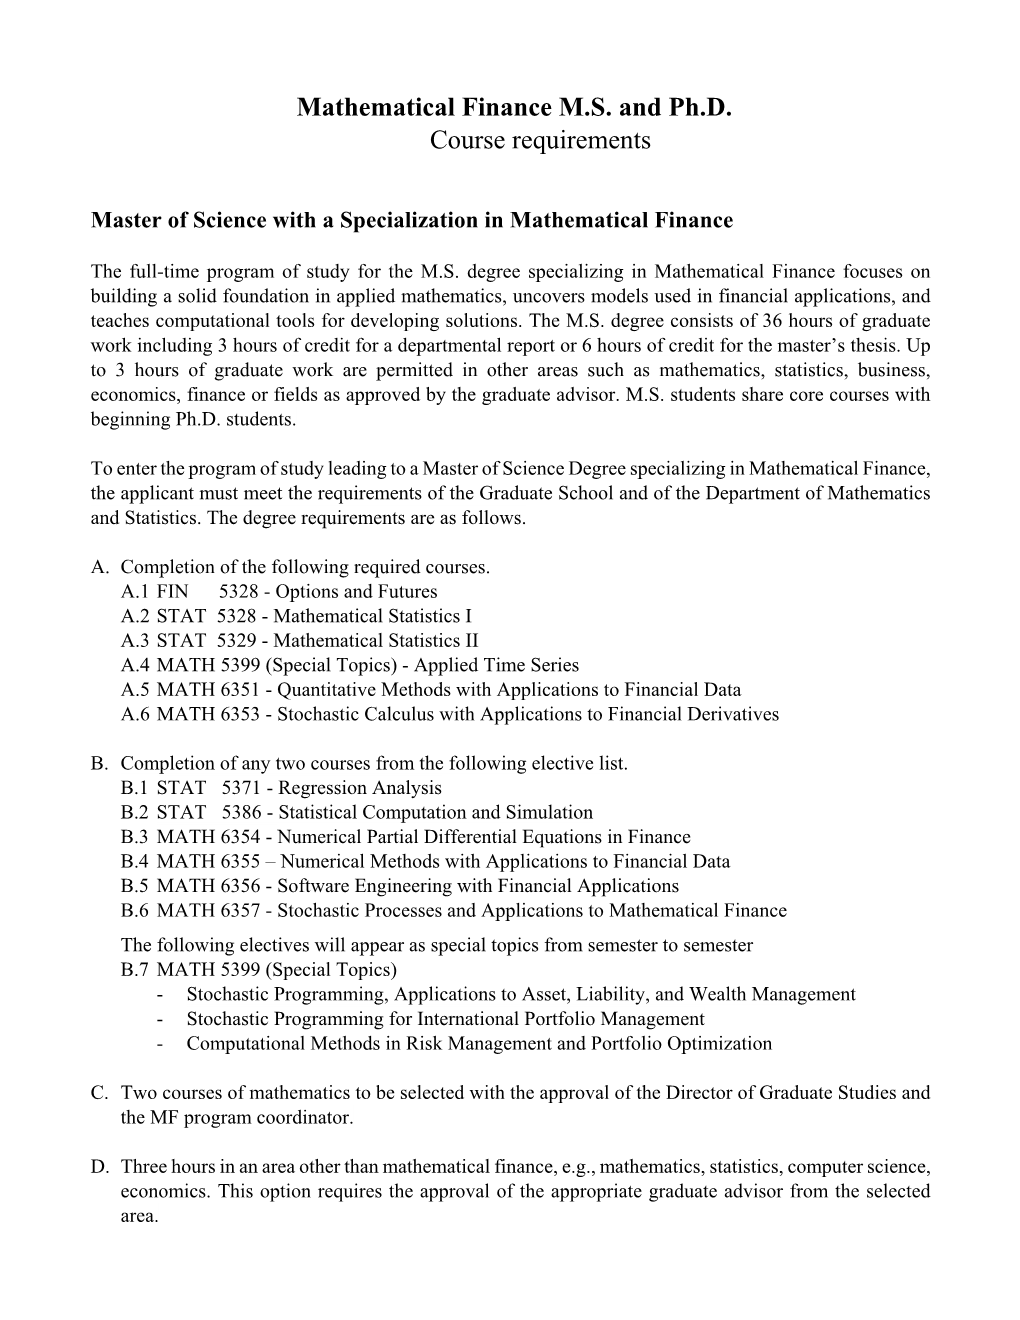 Mathematical Finance MS and Ph.D. Course Requirements